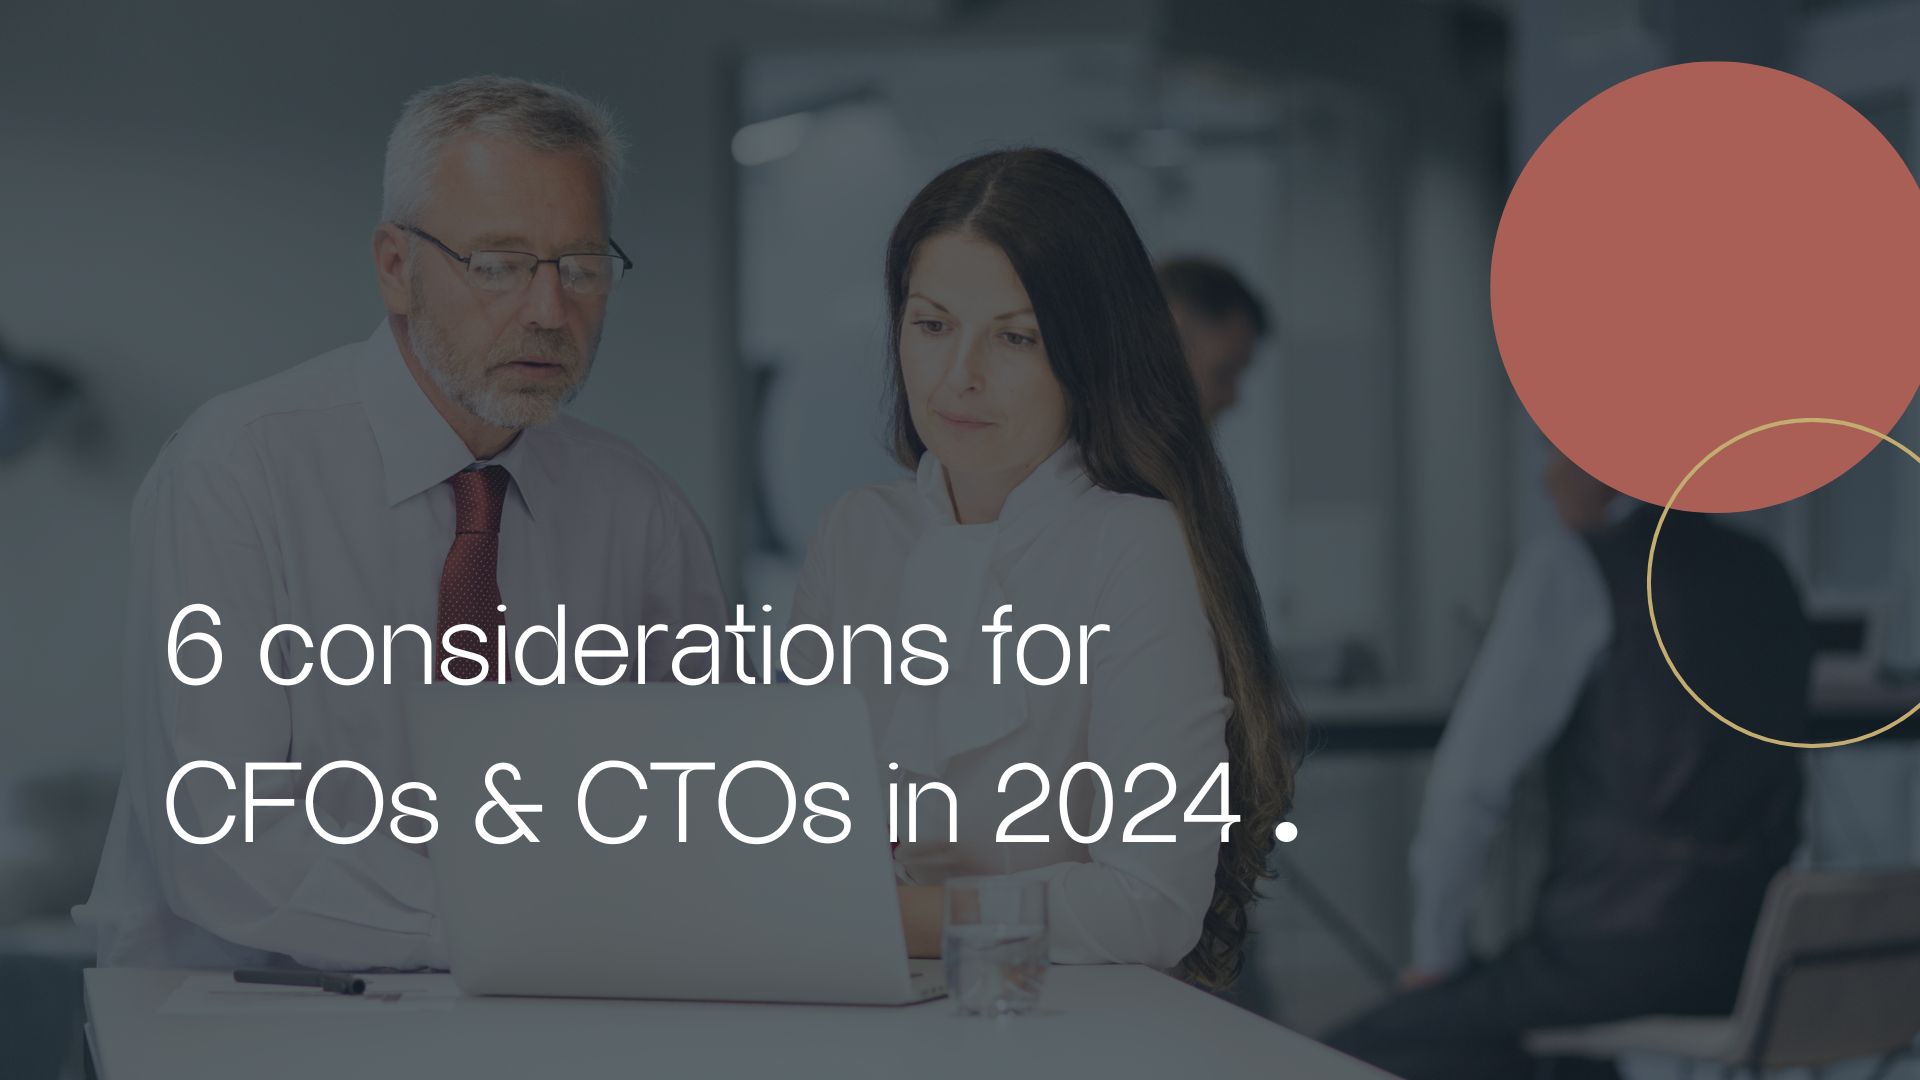 6 considerations for CFOs & CTOs in 2024